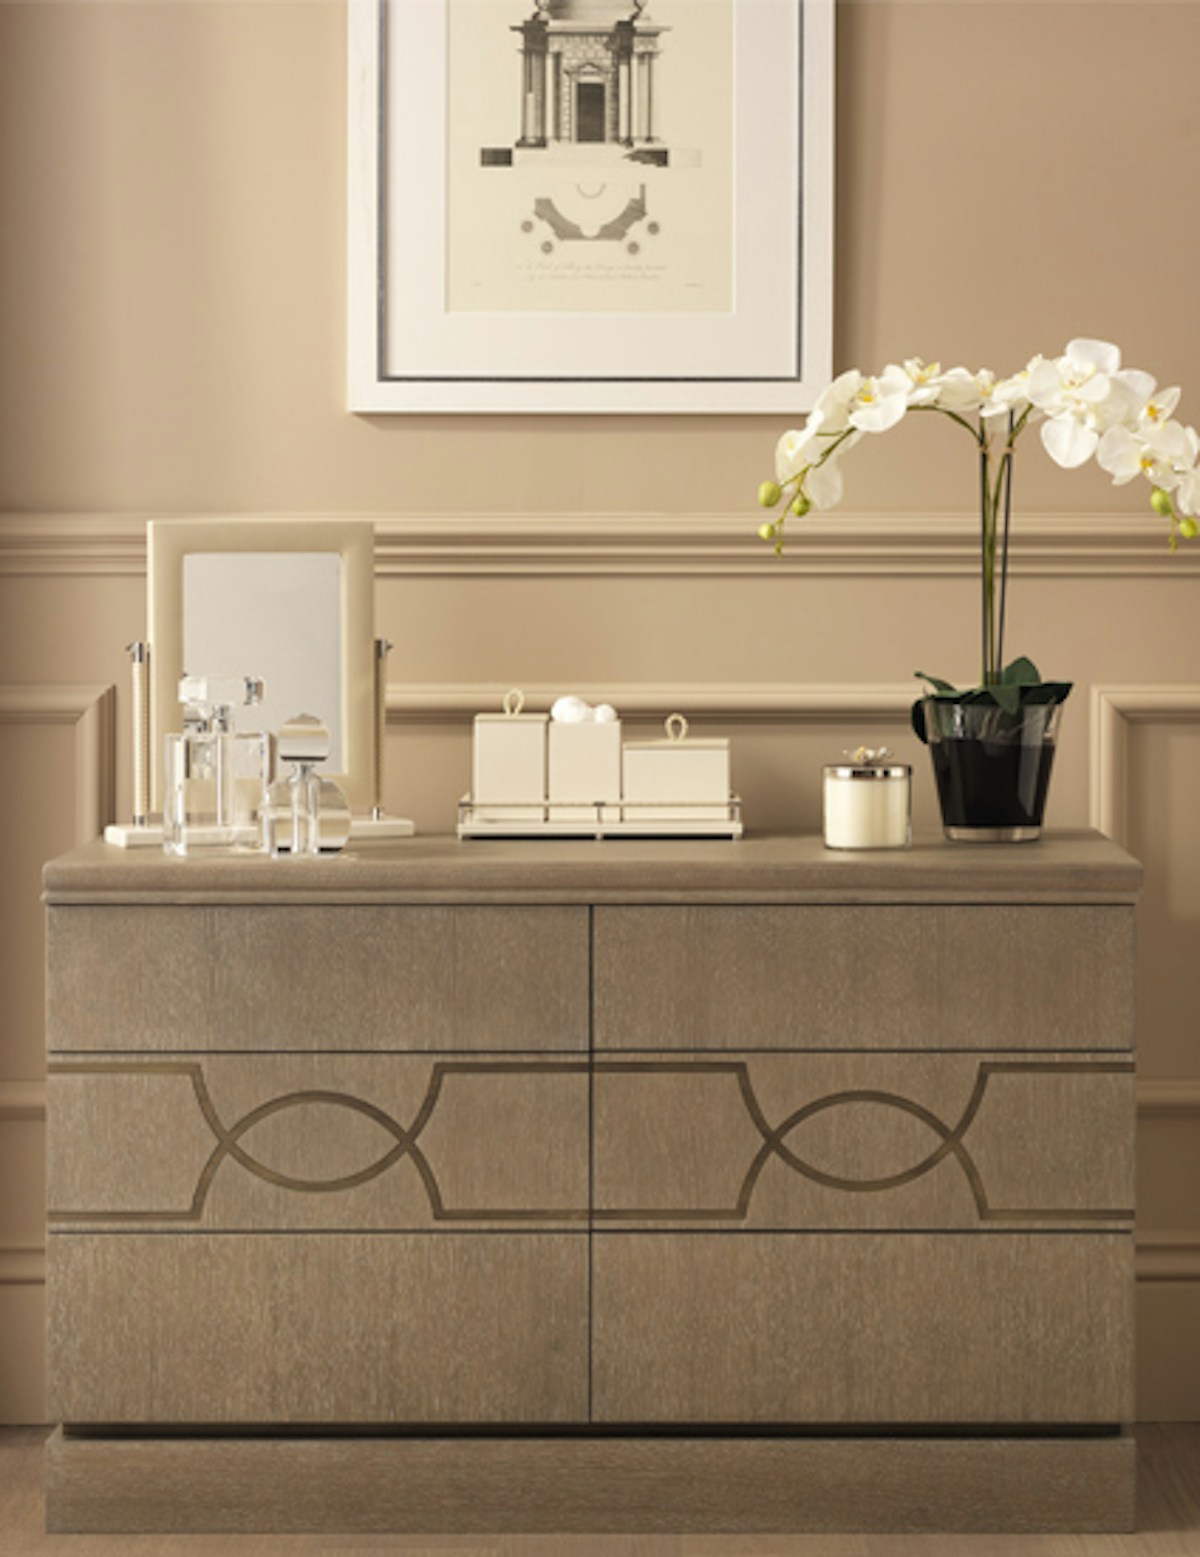 LuxDeco’s Linda Holmes on the exclusive Eaton Square Collection - LuxDeco Style Guide